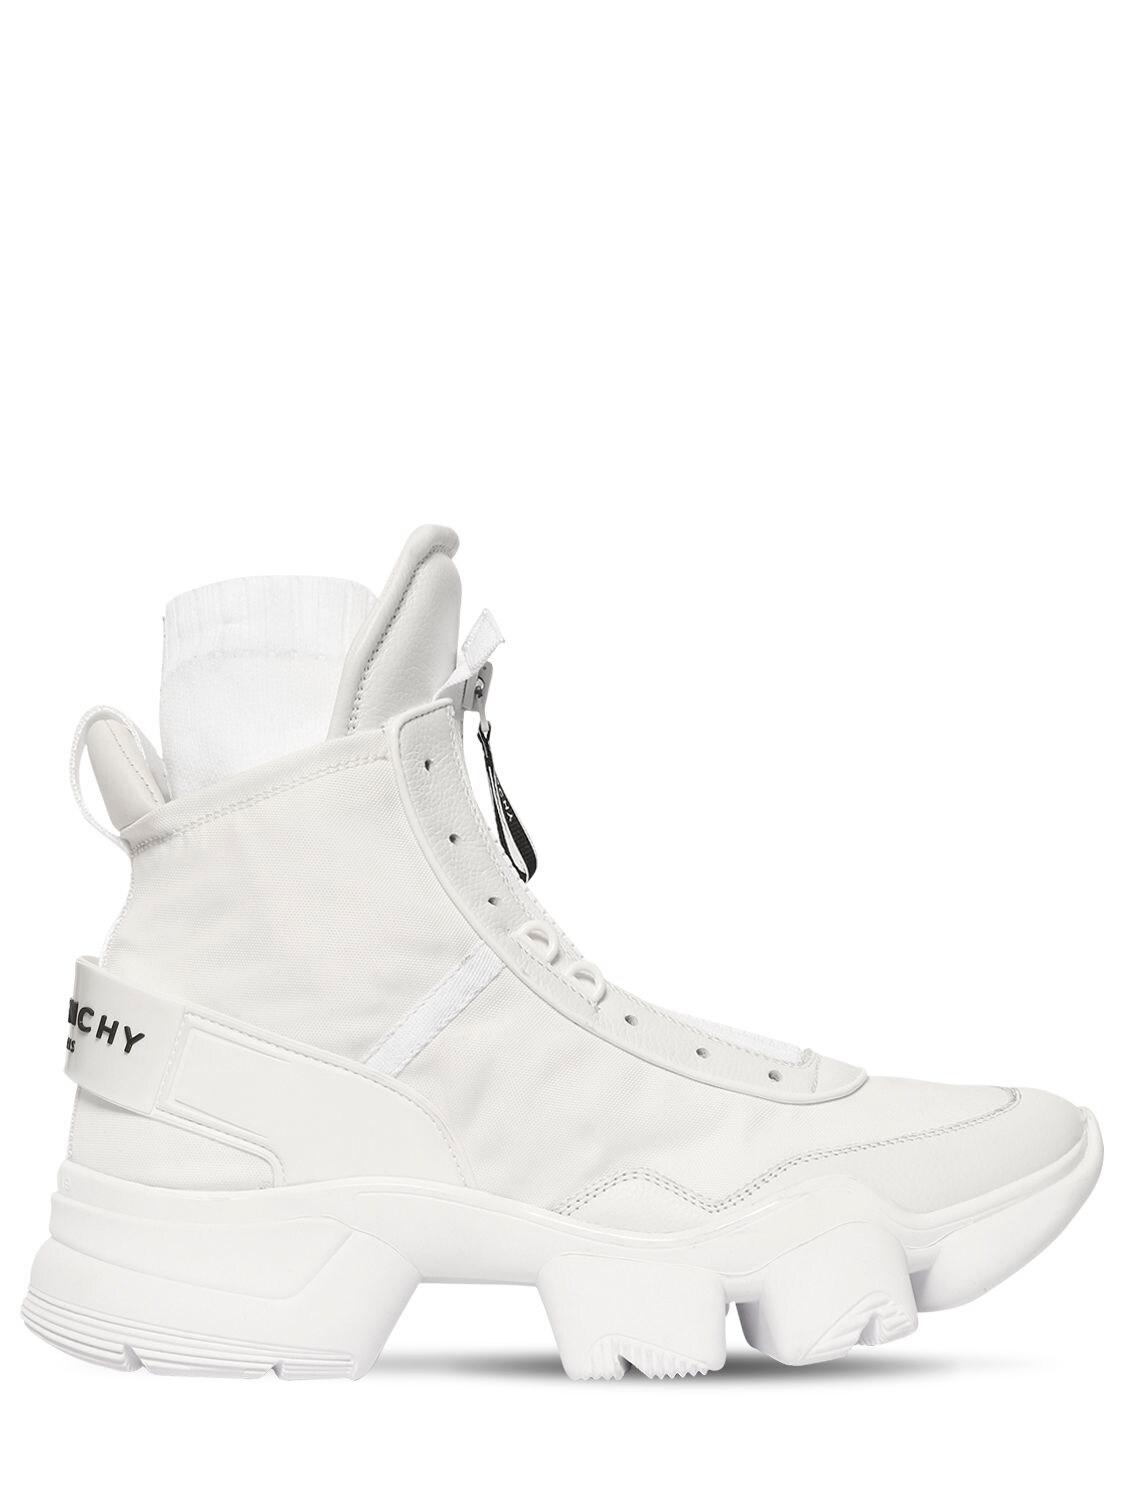 Givenchy Jaw Nylon Sock High Top Sneakers in White for Men | Lyst